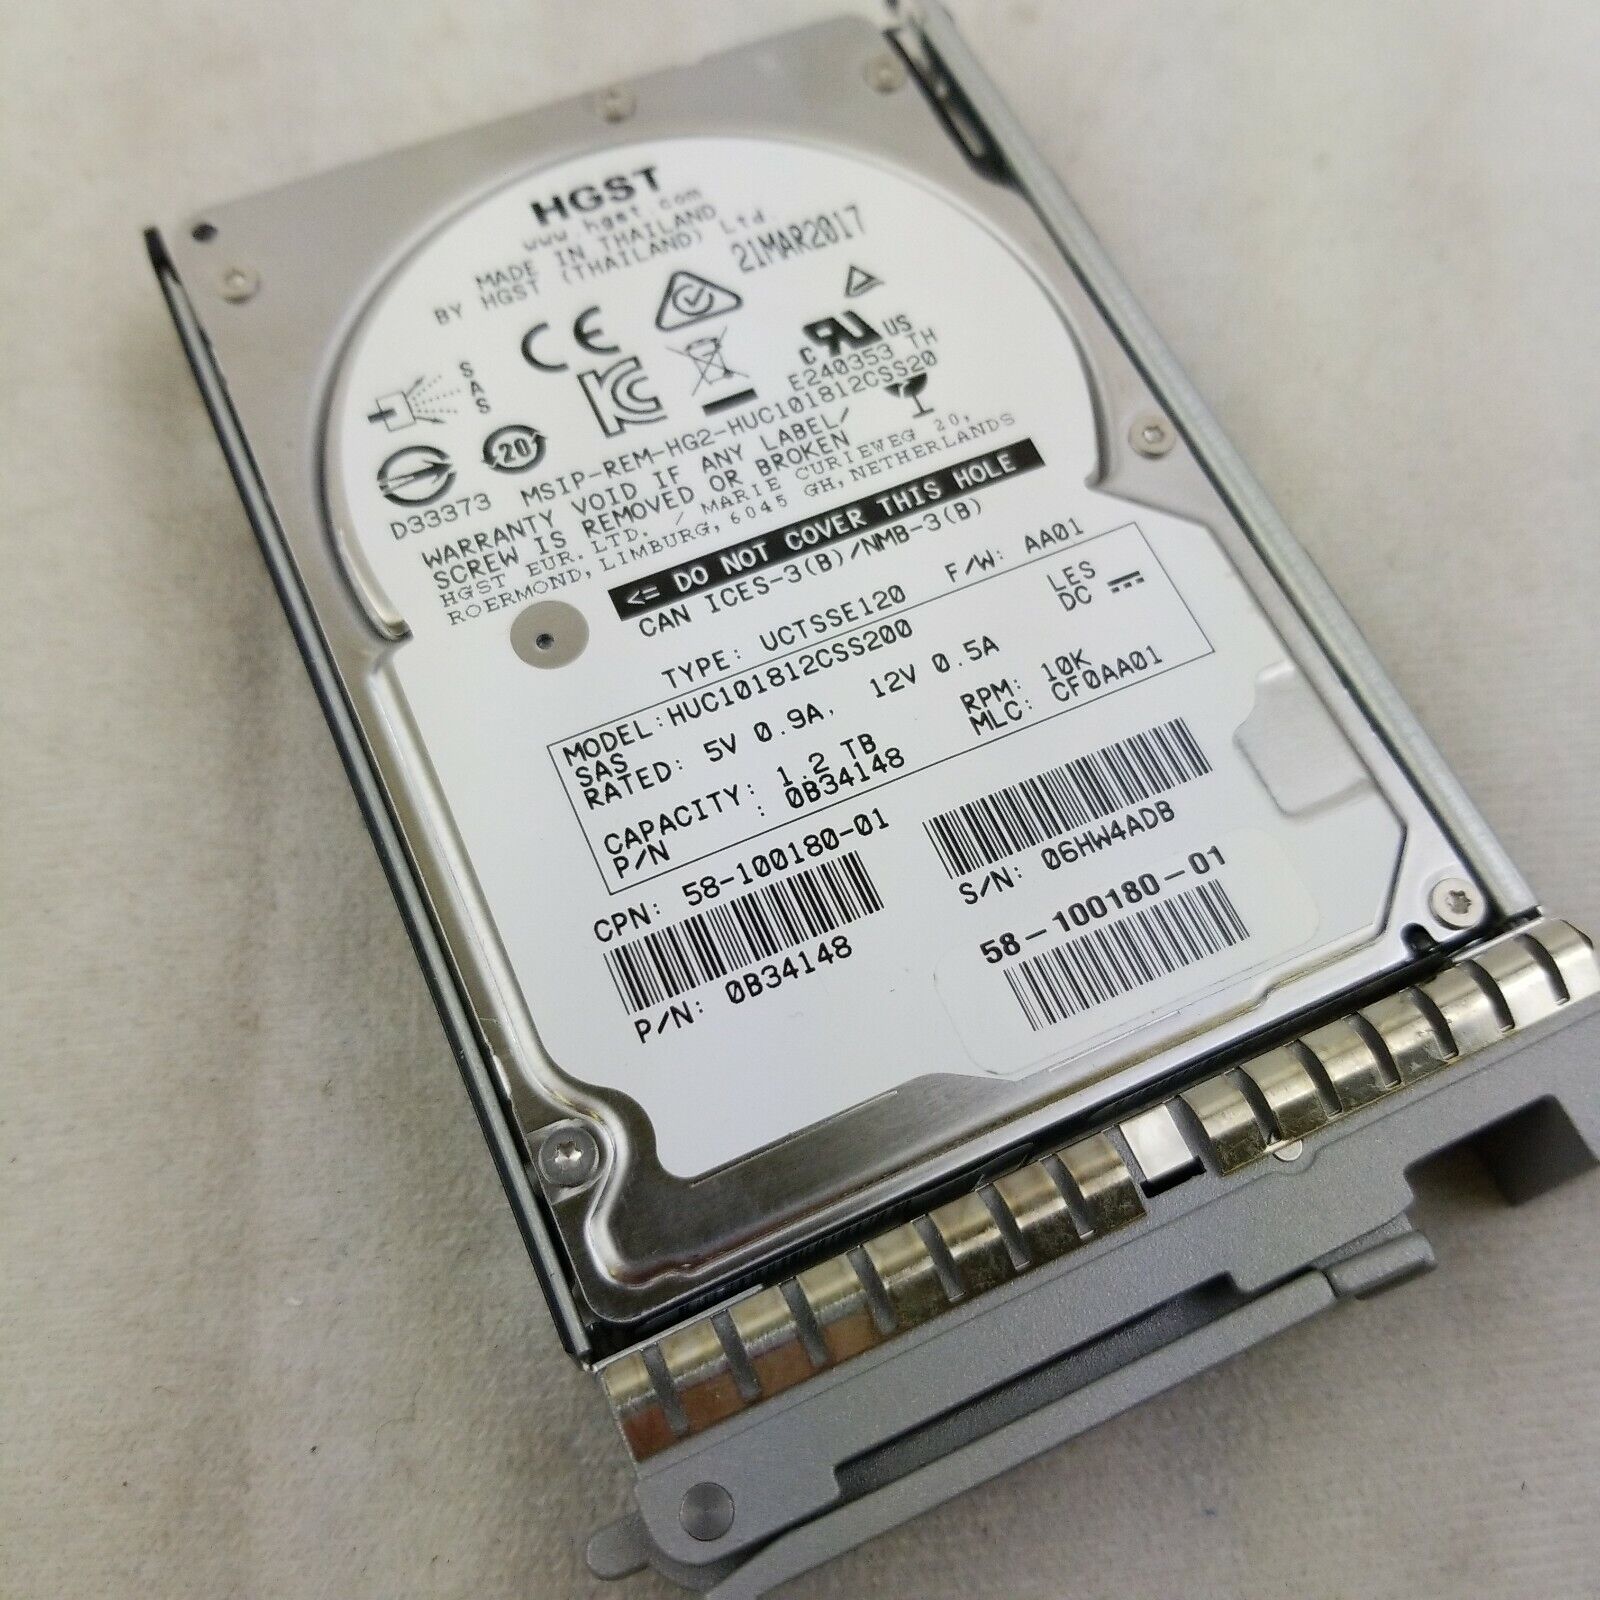 HGST Ultrastar HUC101812CSS200 1.2 TB SAS 3 2.5 in Enterprise Drive Tested Wiped